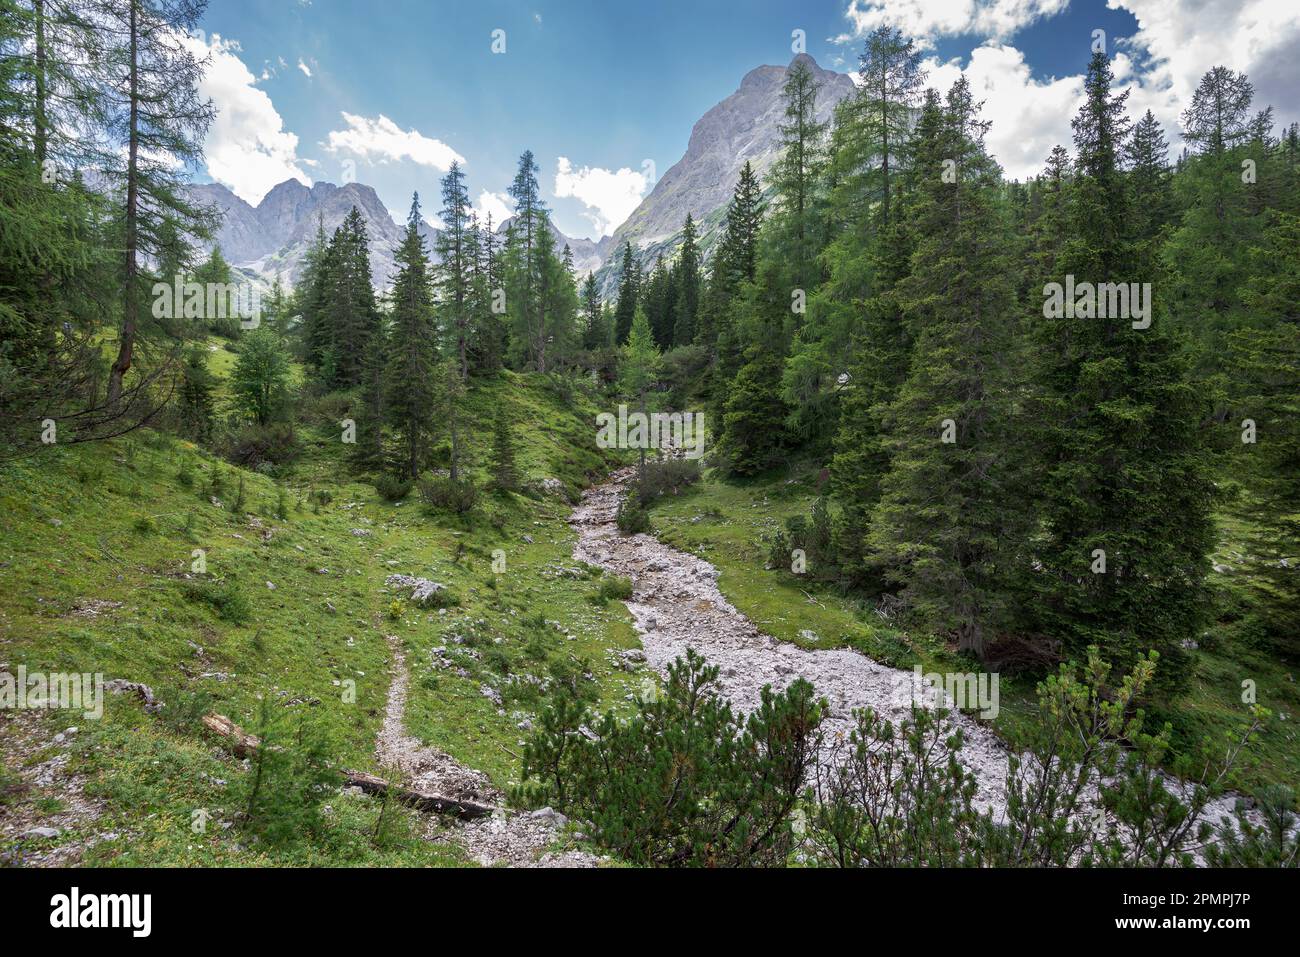 The Gaisbach stream, by the Seebensee lake, in the Mieming Range, State of Tyrol, Austria. Stock Photo